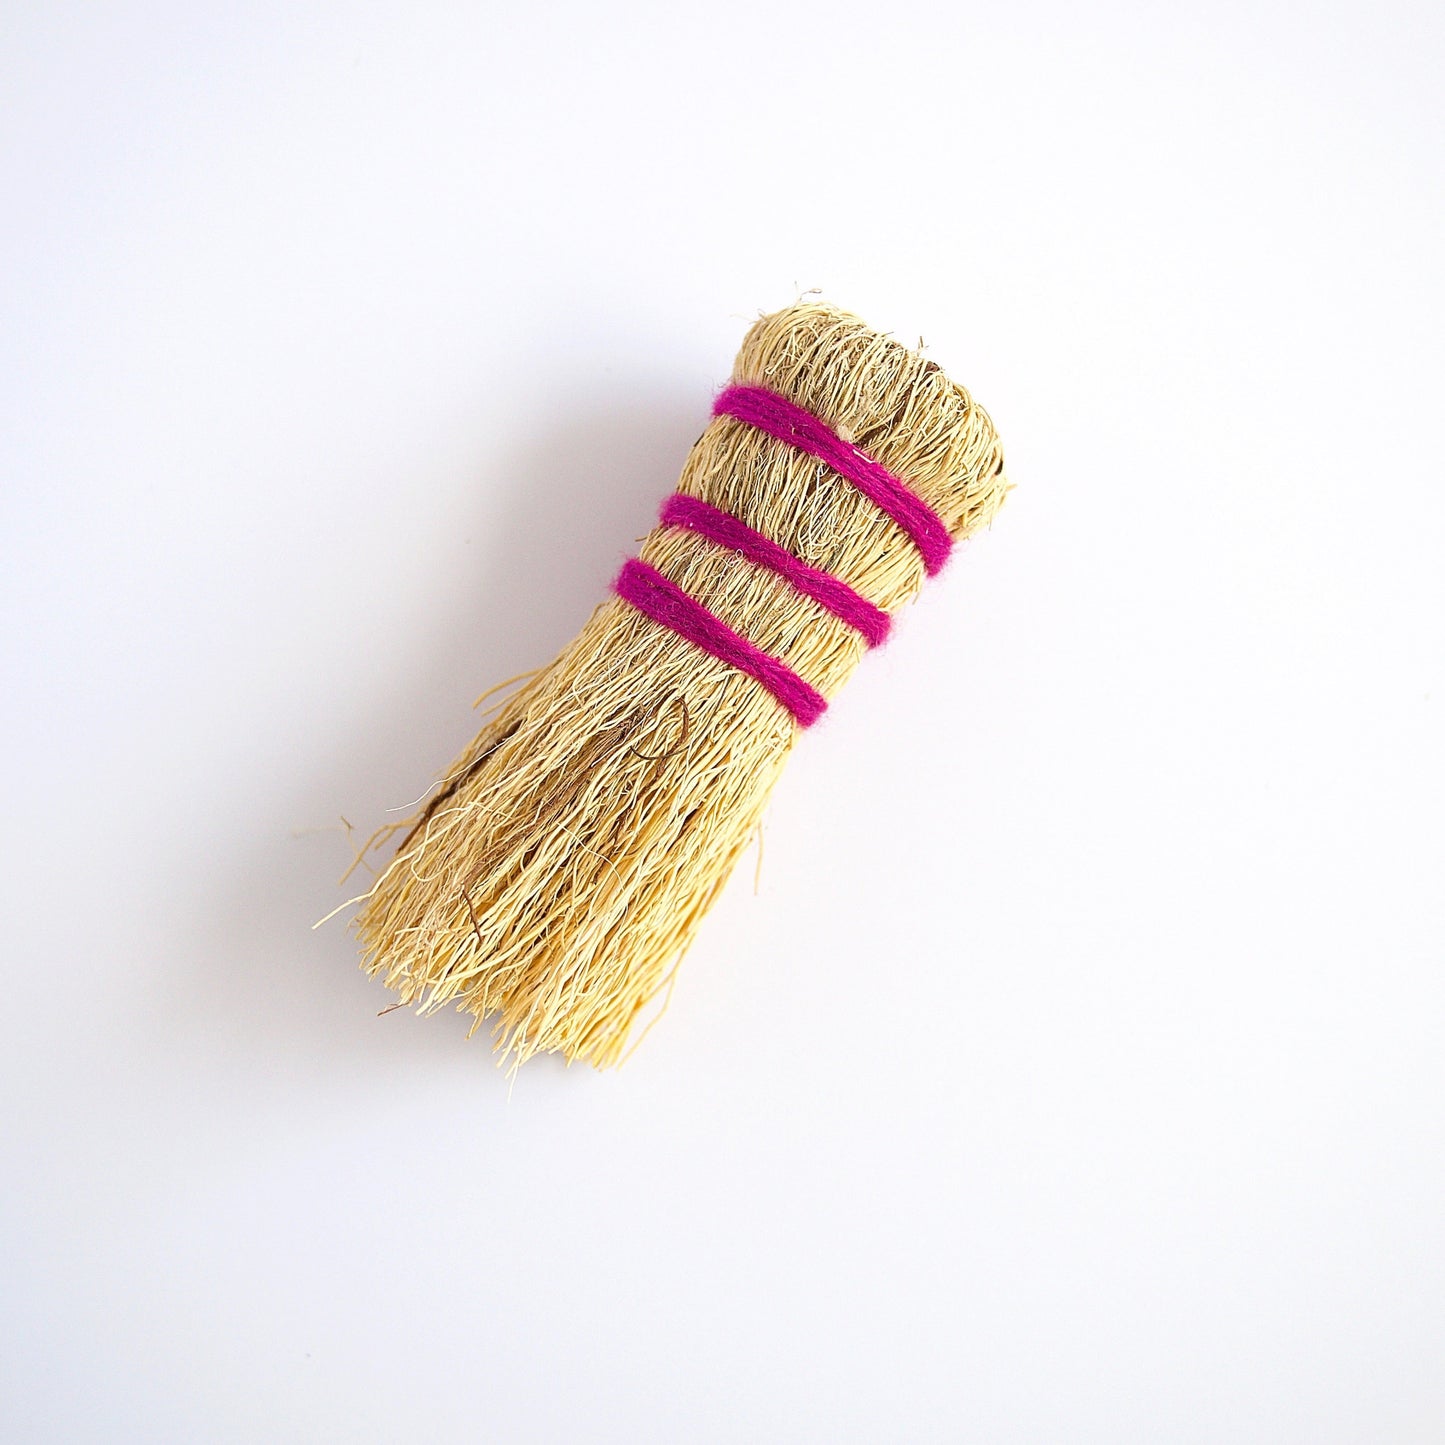 Escobeta de raiz Mexican dish scrubber made from plant roots wrapped in fucshia wool yarn